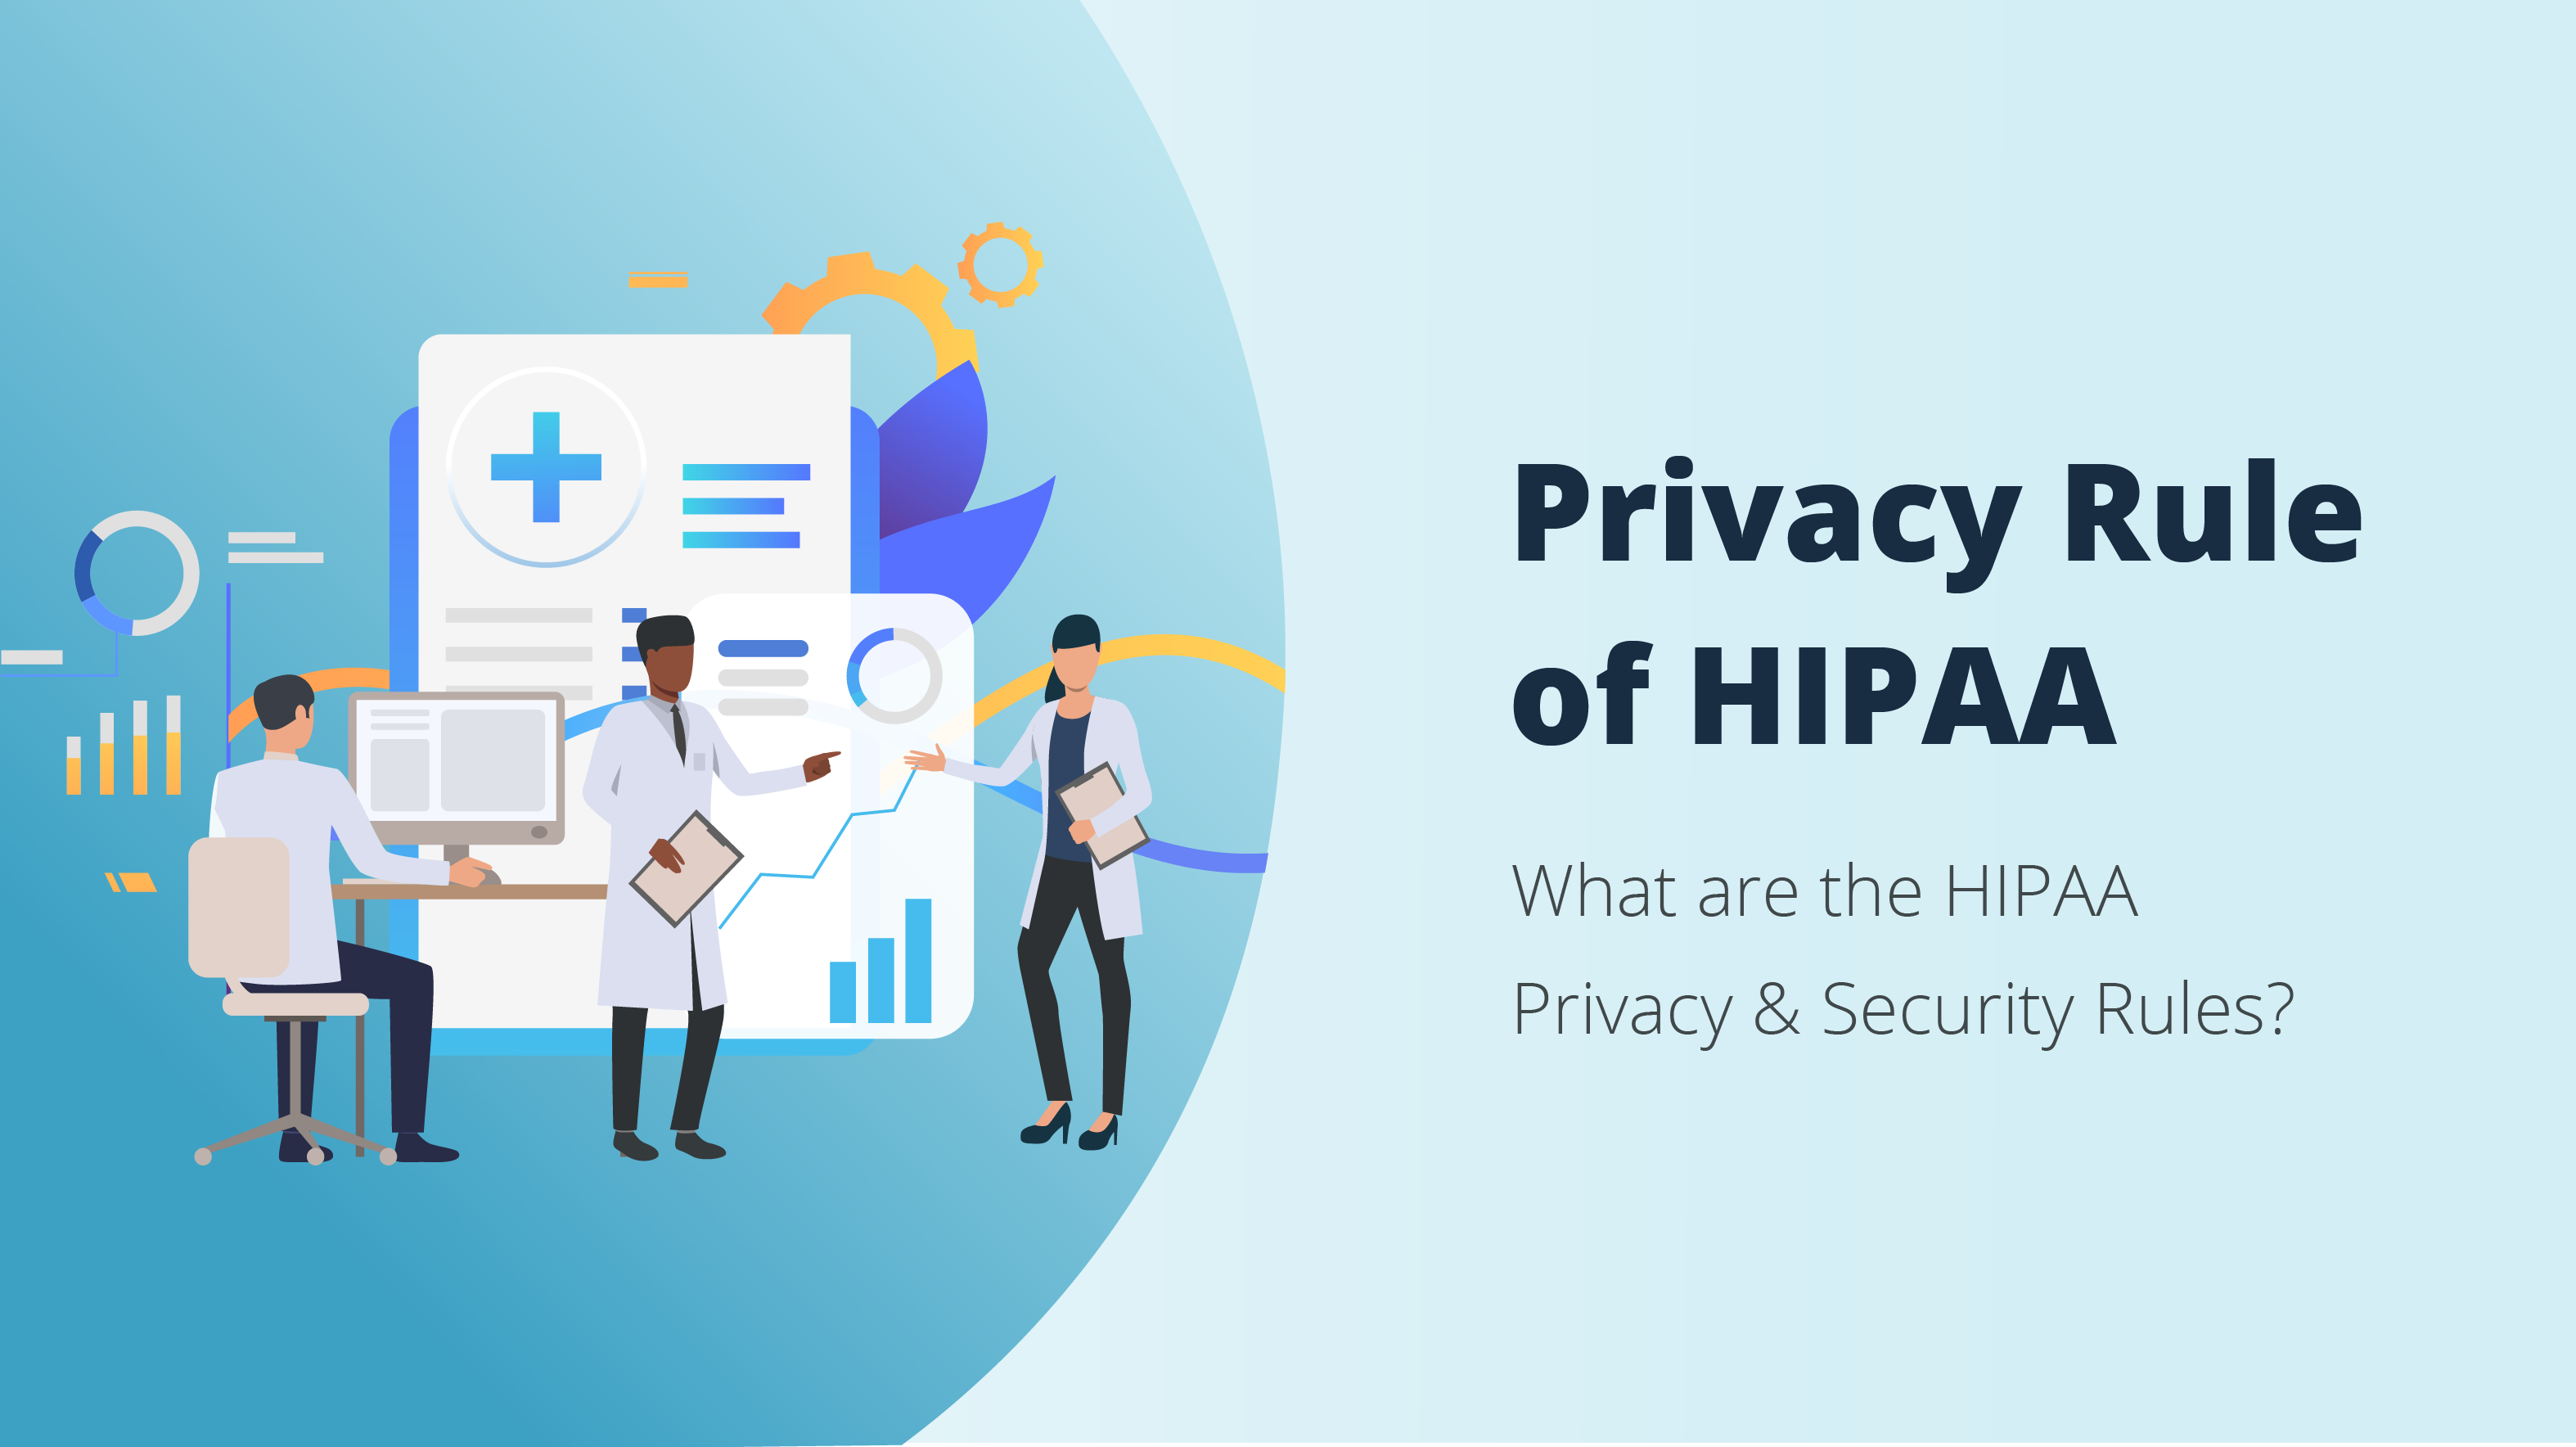 Privacy rule of HIPAA: What are the HIPAA security rules & privacy rules?